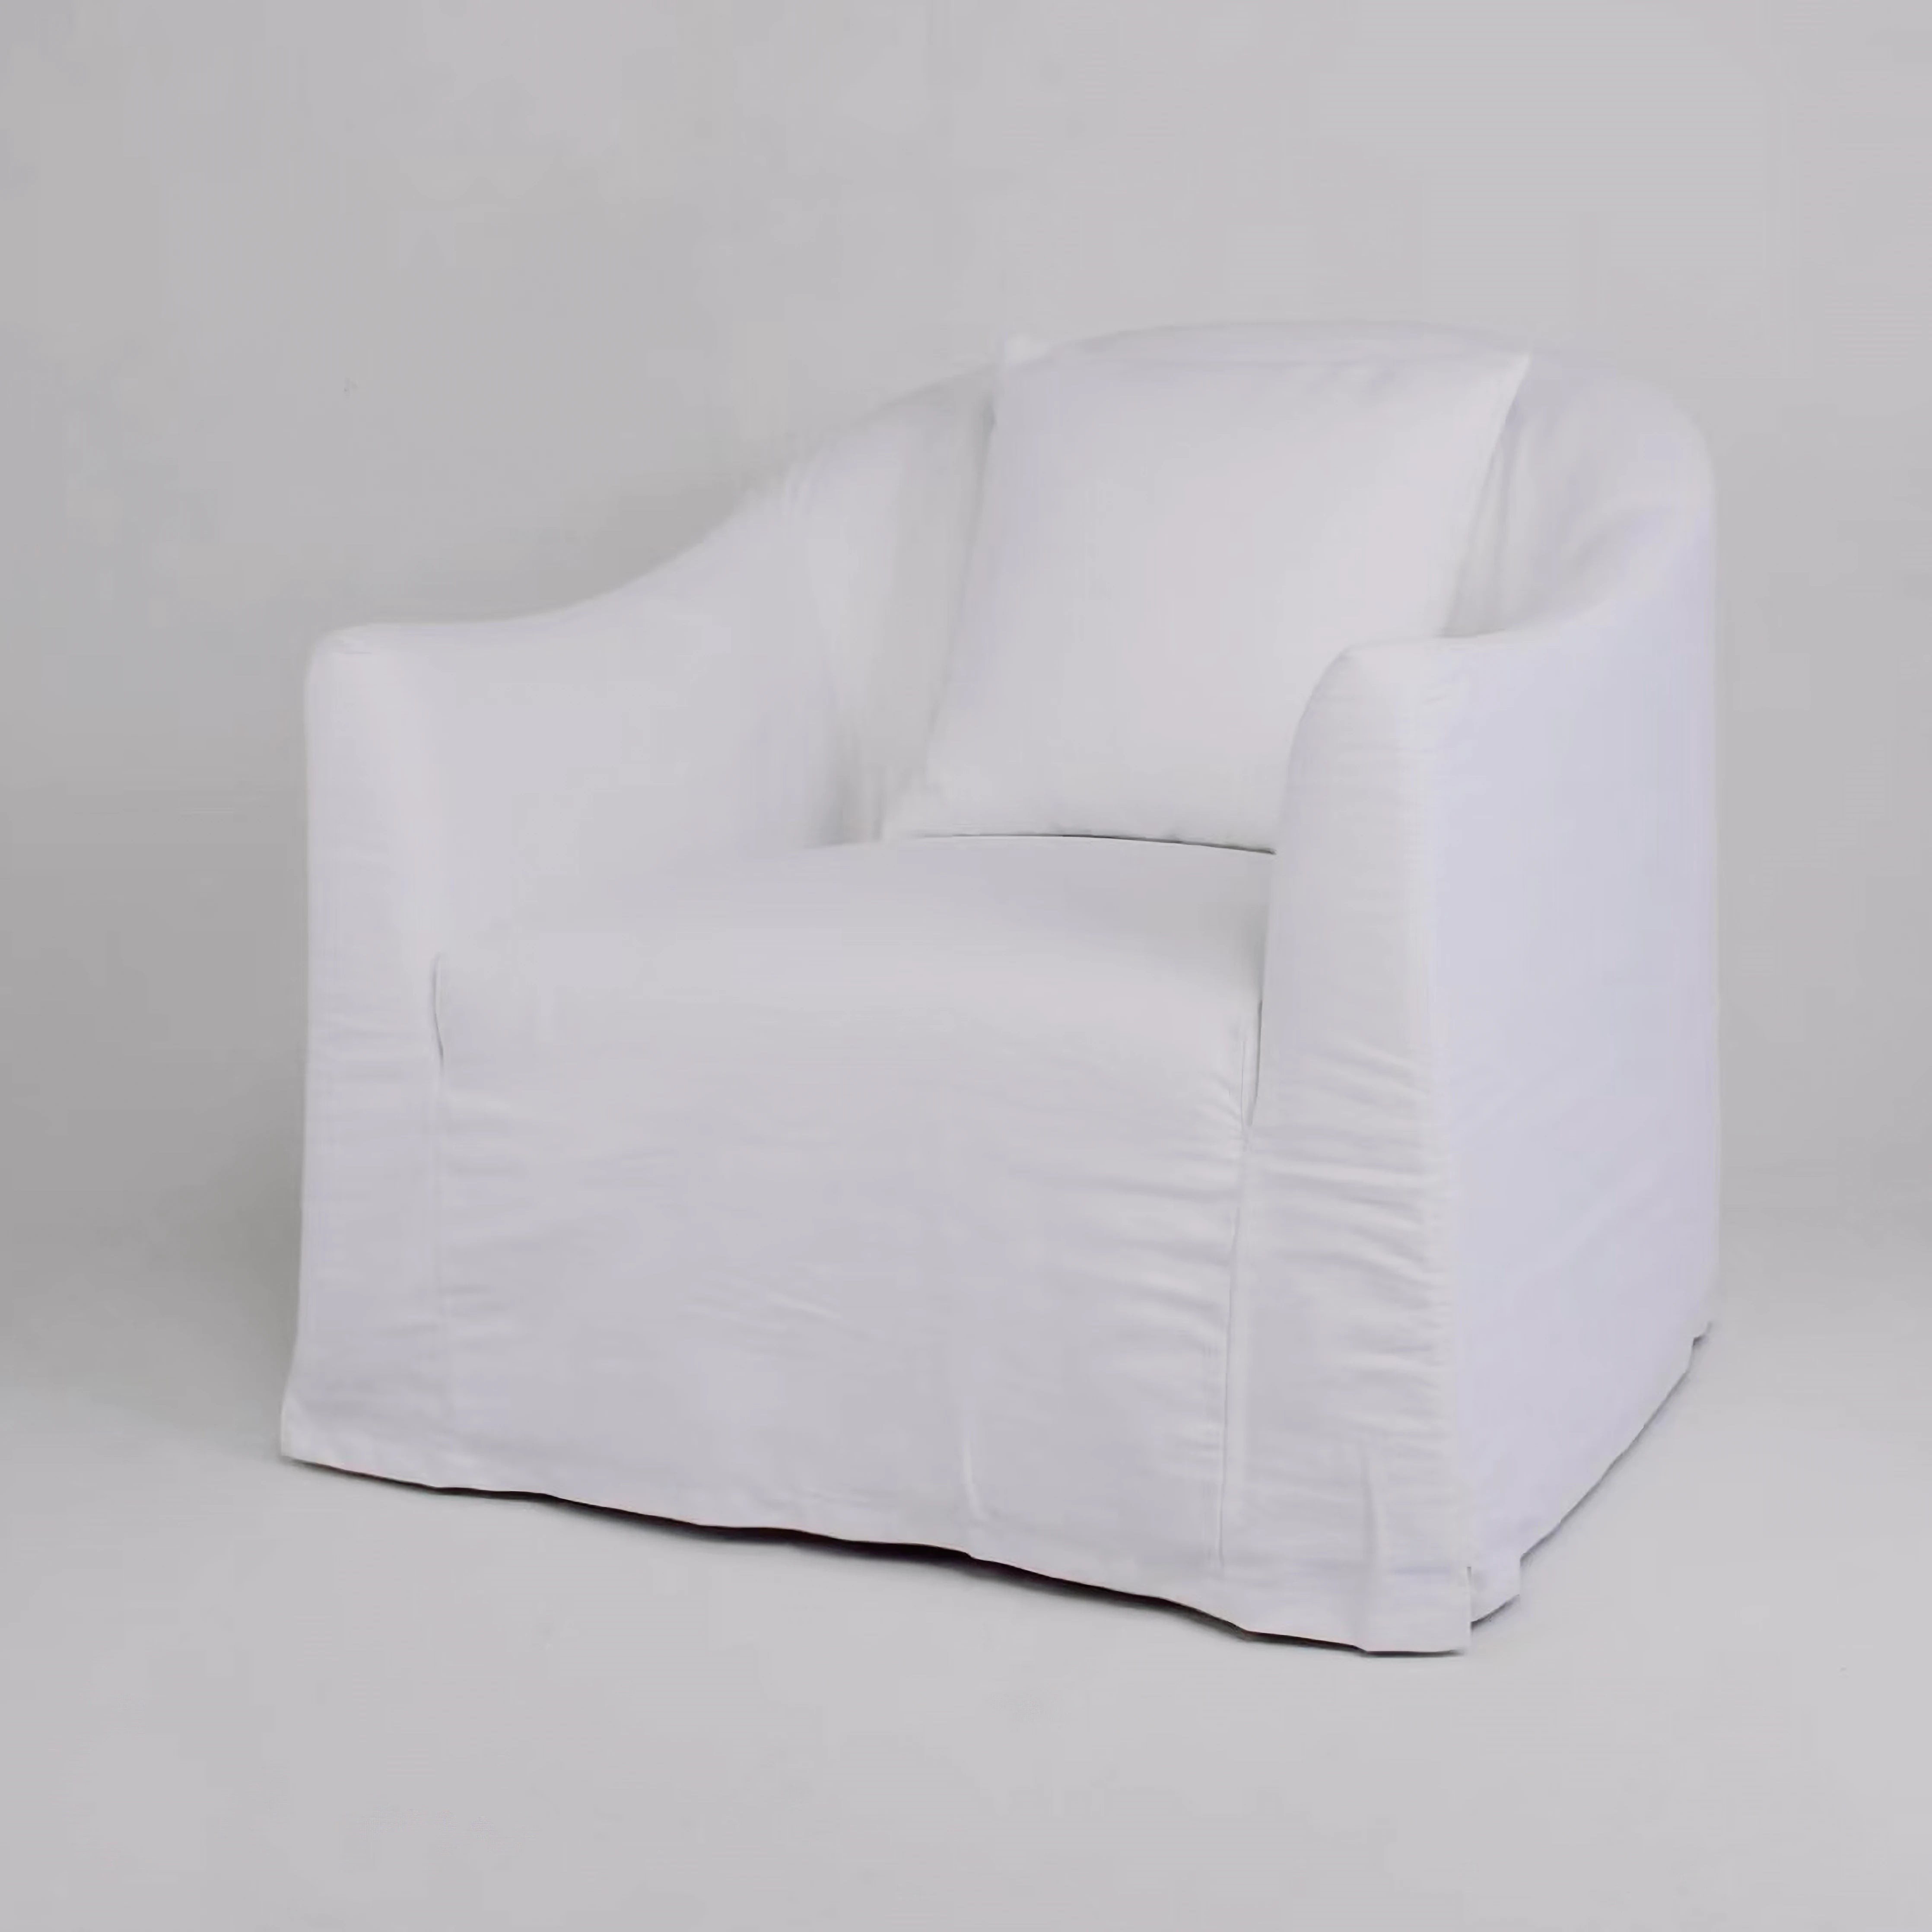 Late 20th Century Modified Tuxedo Slipcover Style Pillow Back